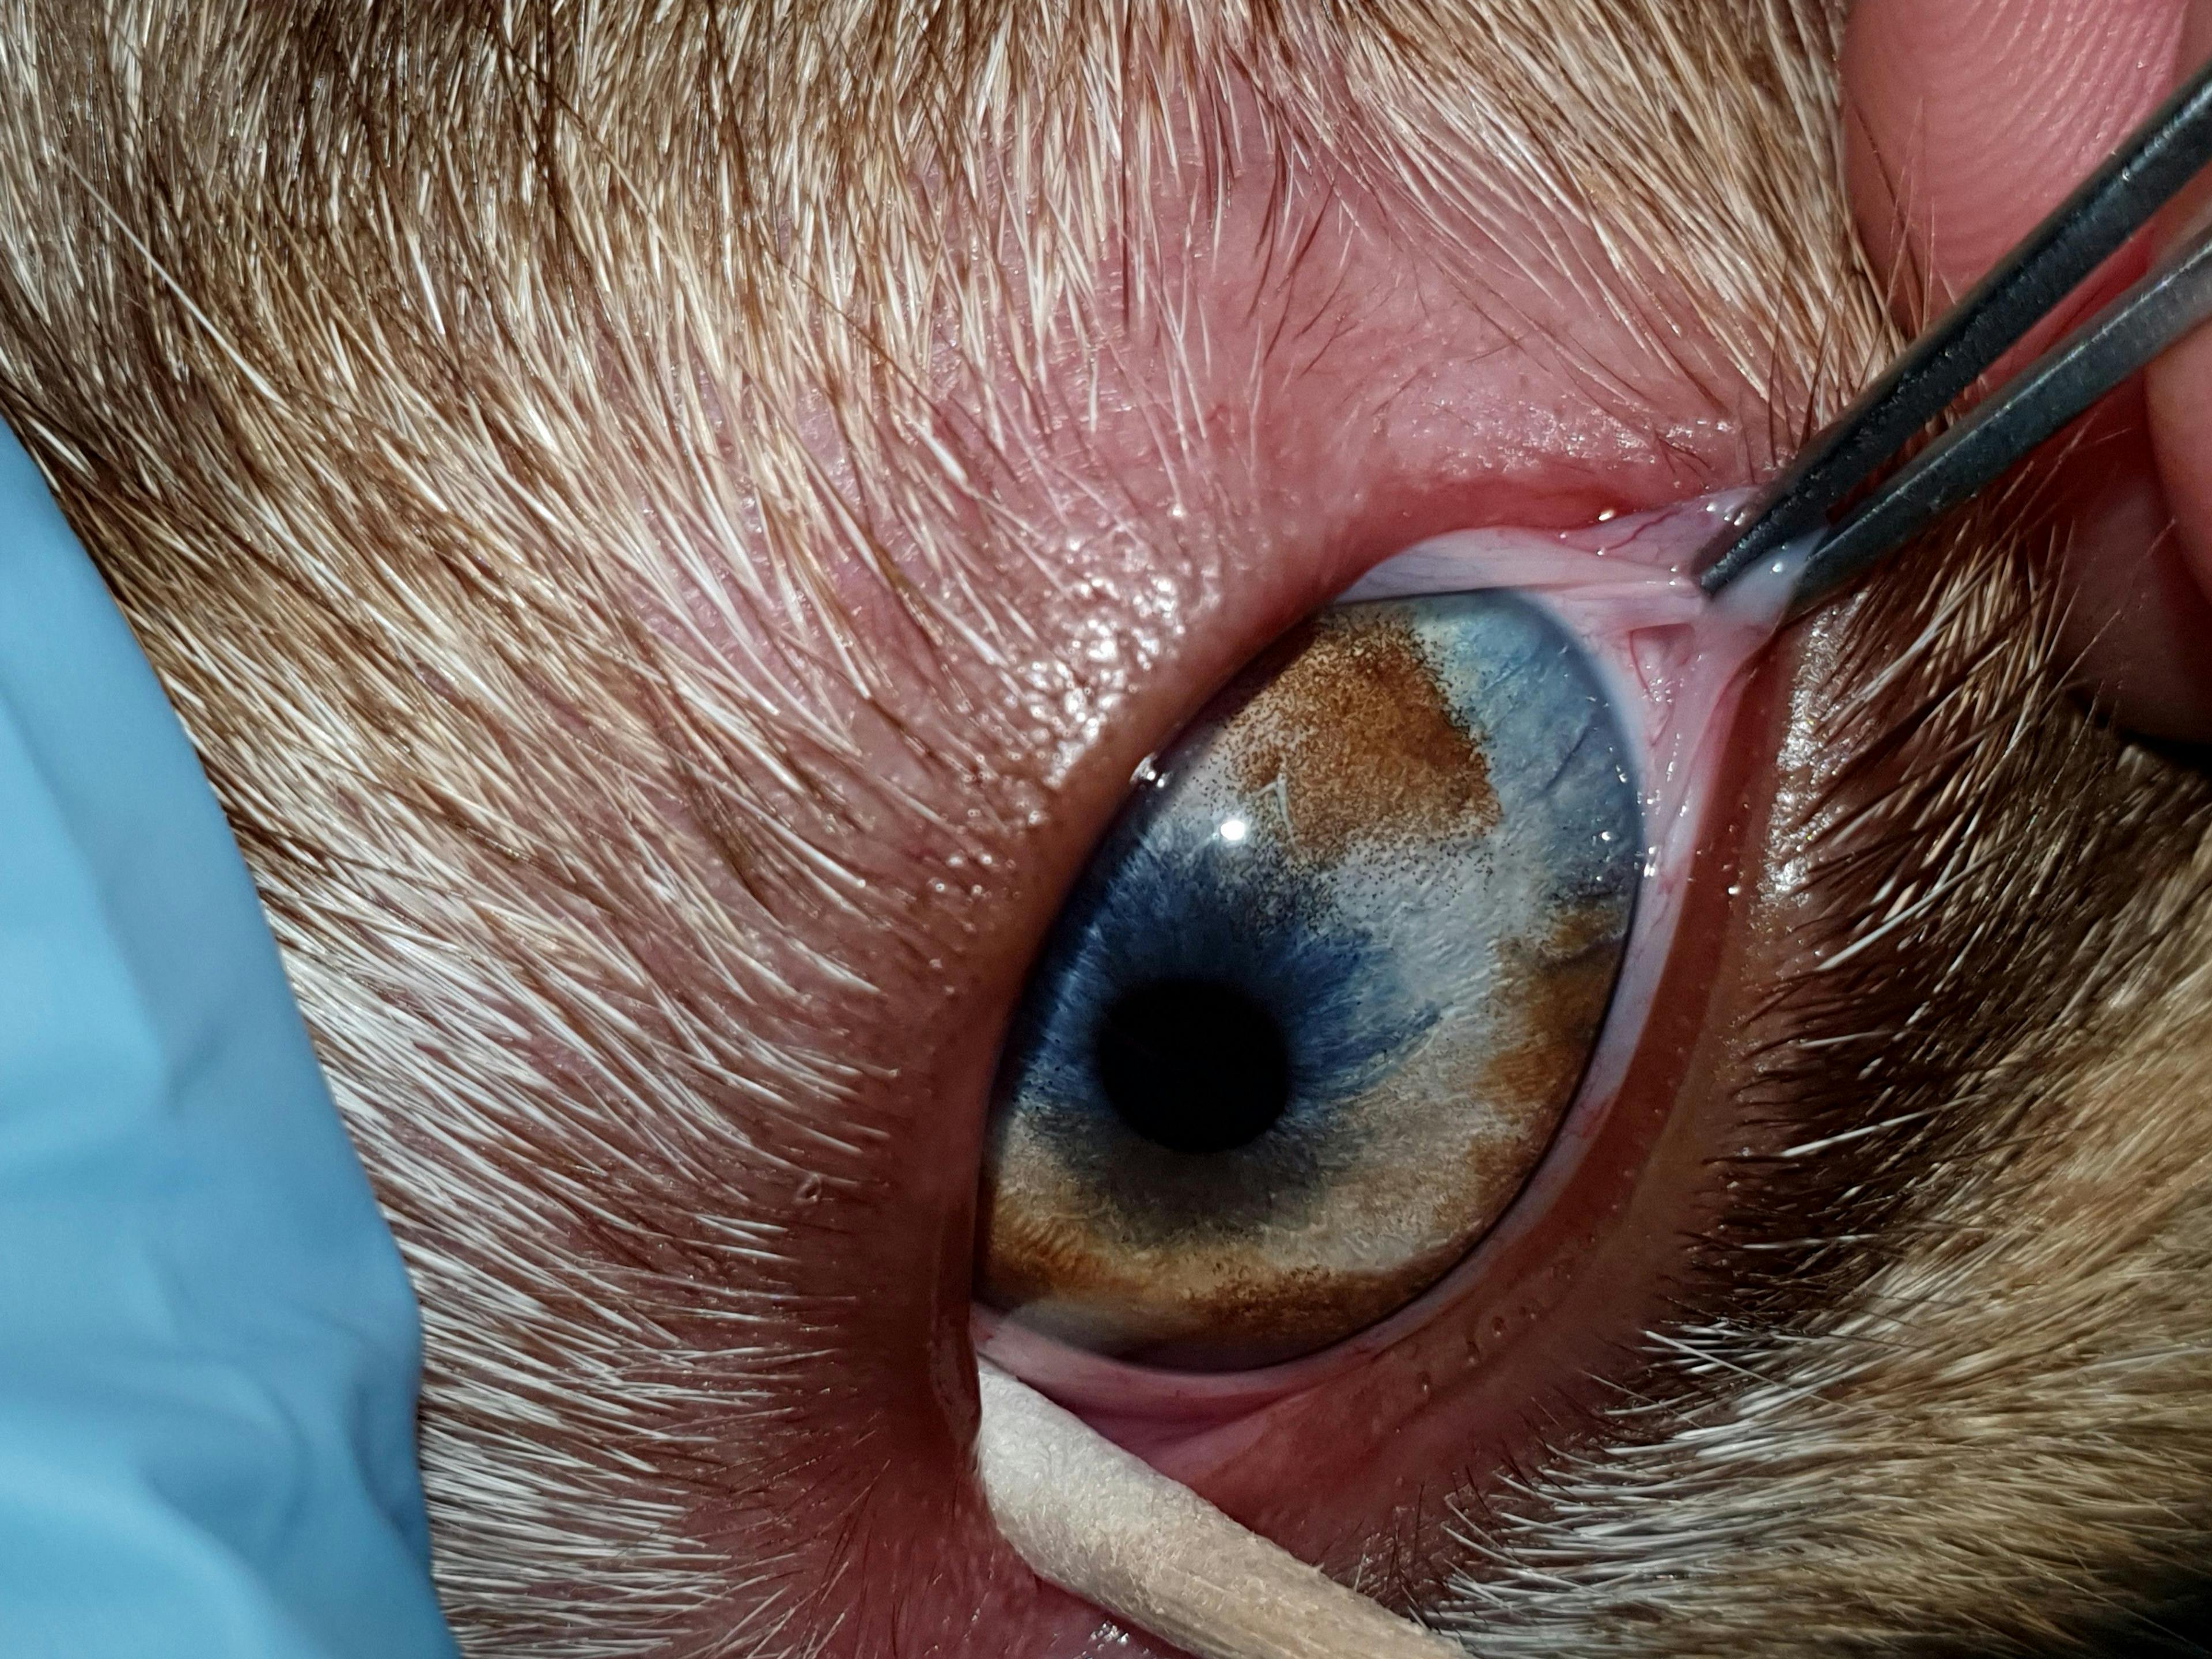 Figure 8. Heterochromia iridis, or a multicolored iris. This case is a normal congenital variation, but in some patients, changes in iris color may indicate inflammation or neoplasia.